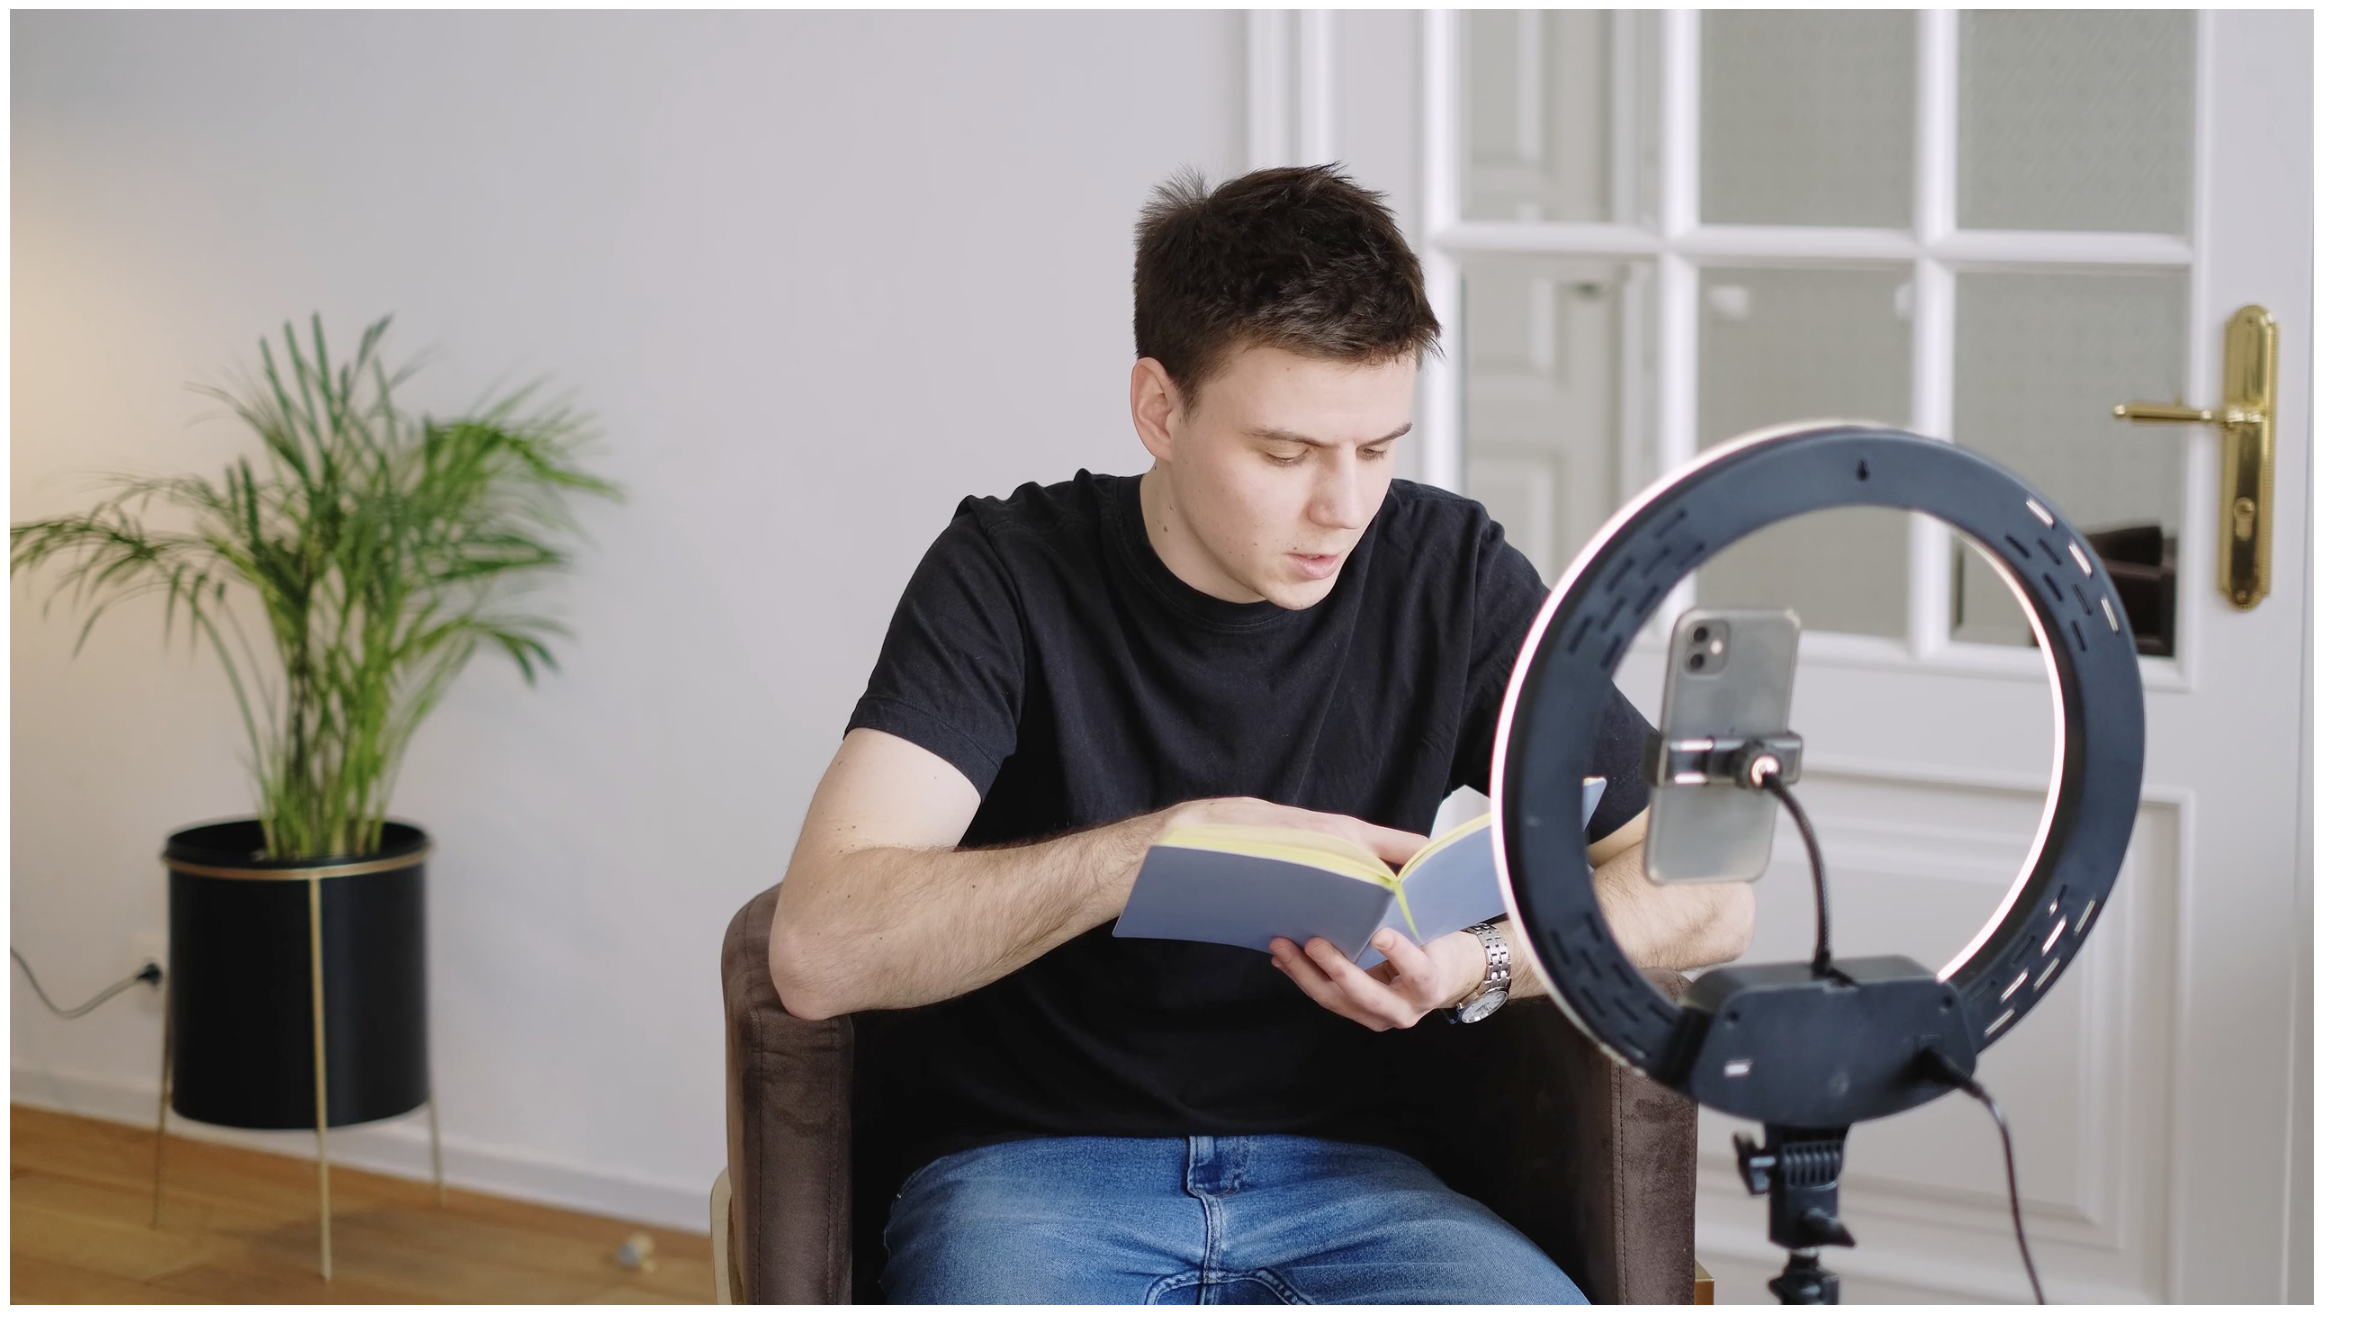 Image of a man creating content with a phone and a ring light